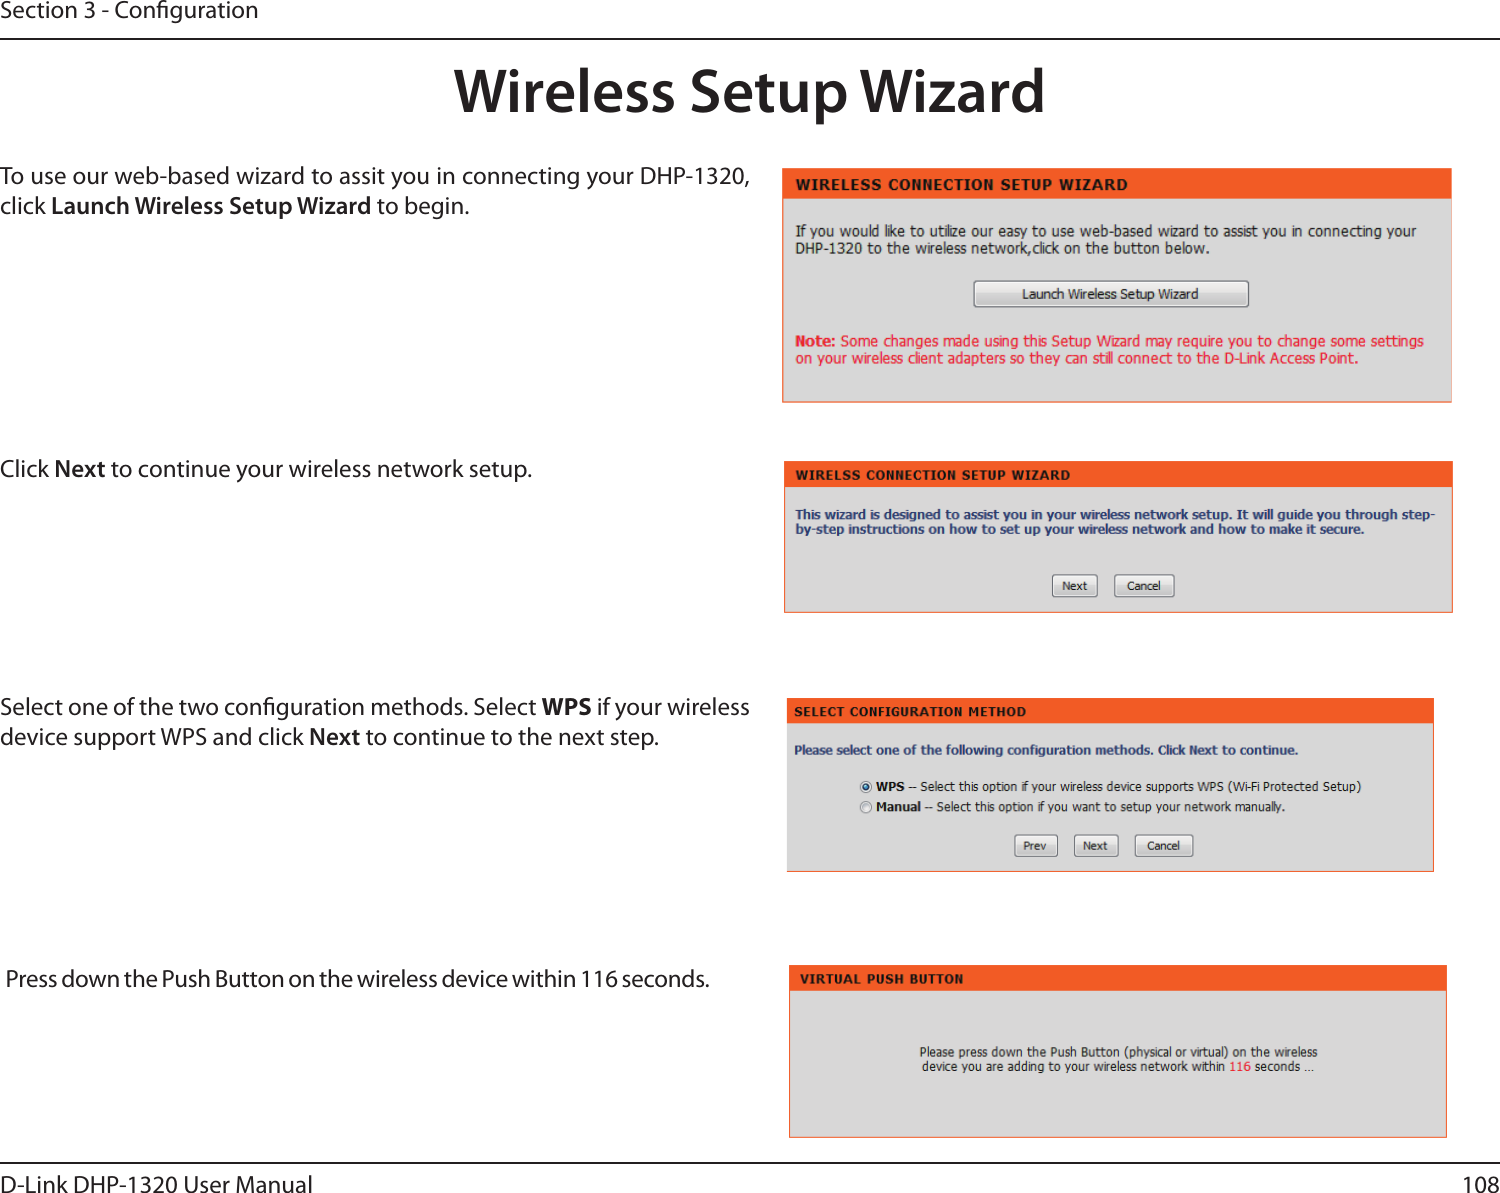 108D-Link DHP-1320 User ManualSection 3 - CongurationWireless Setup WizardTo use our web-based wizard to assit you in connecting your DHP-1320, click Launch Wireless Setup Wizard to begin. Click Next to continue your wireless network setup. Select one of the two conguration methods. Select WPS if your wireless device support WPS and click Next to continue to the next step. Press down the Push Button on the wireless device within 116 seconds. 